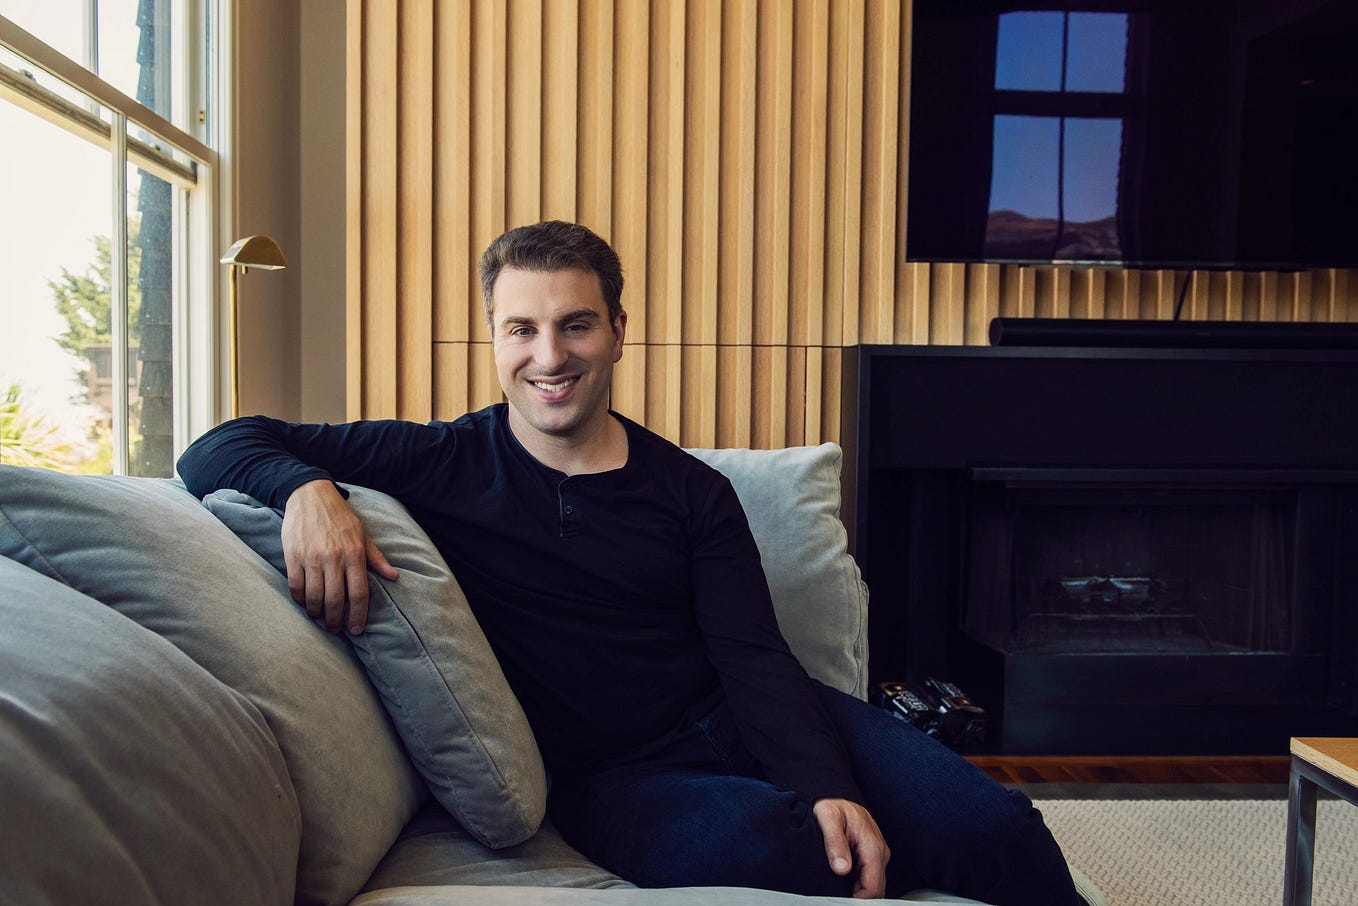 Brian Chesky, Entrepreneur and Airbnb Founder